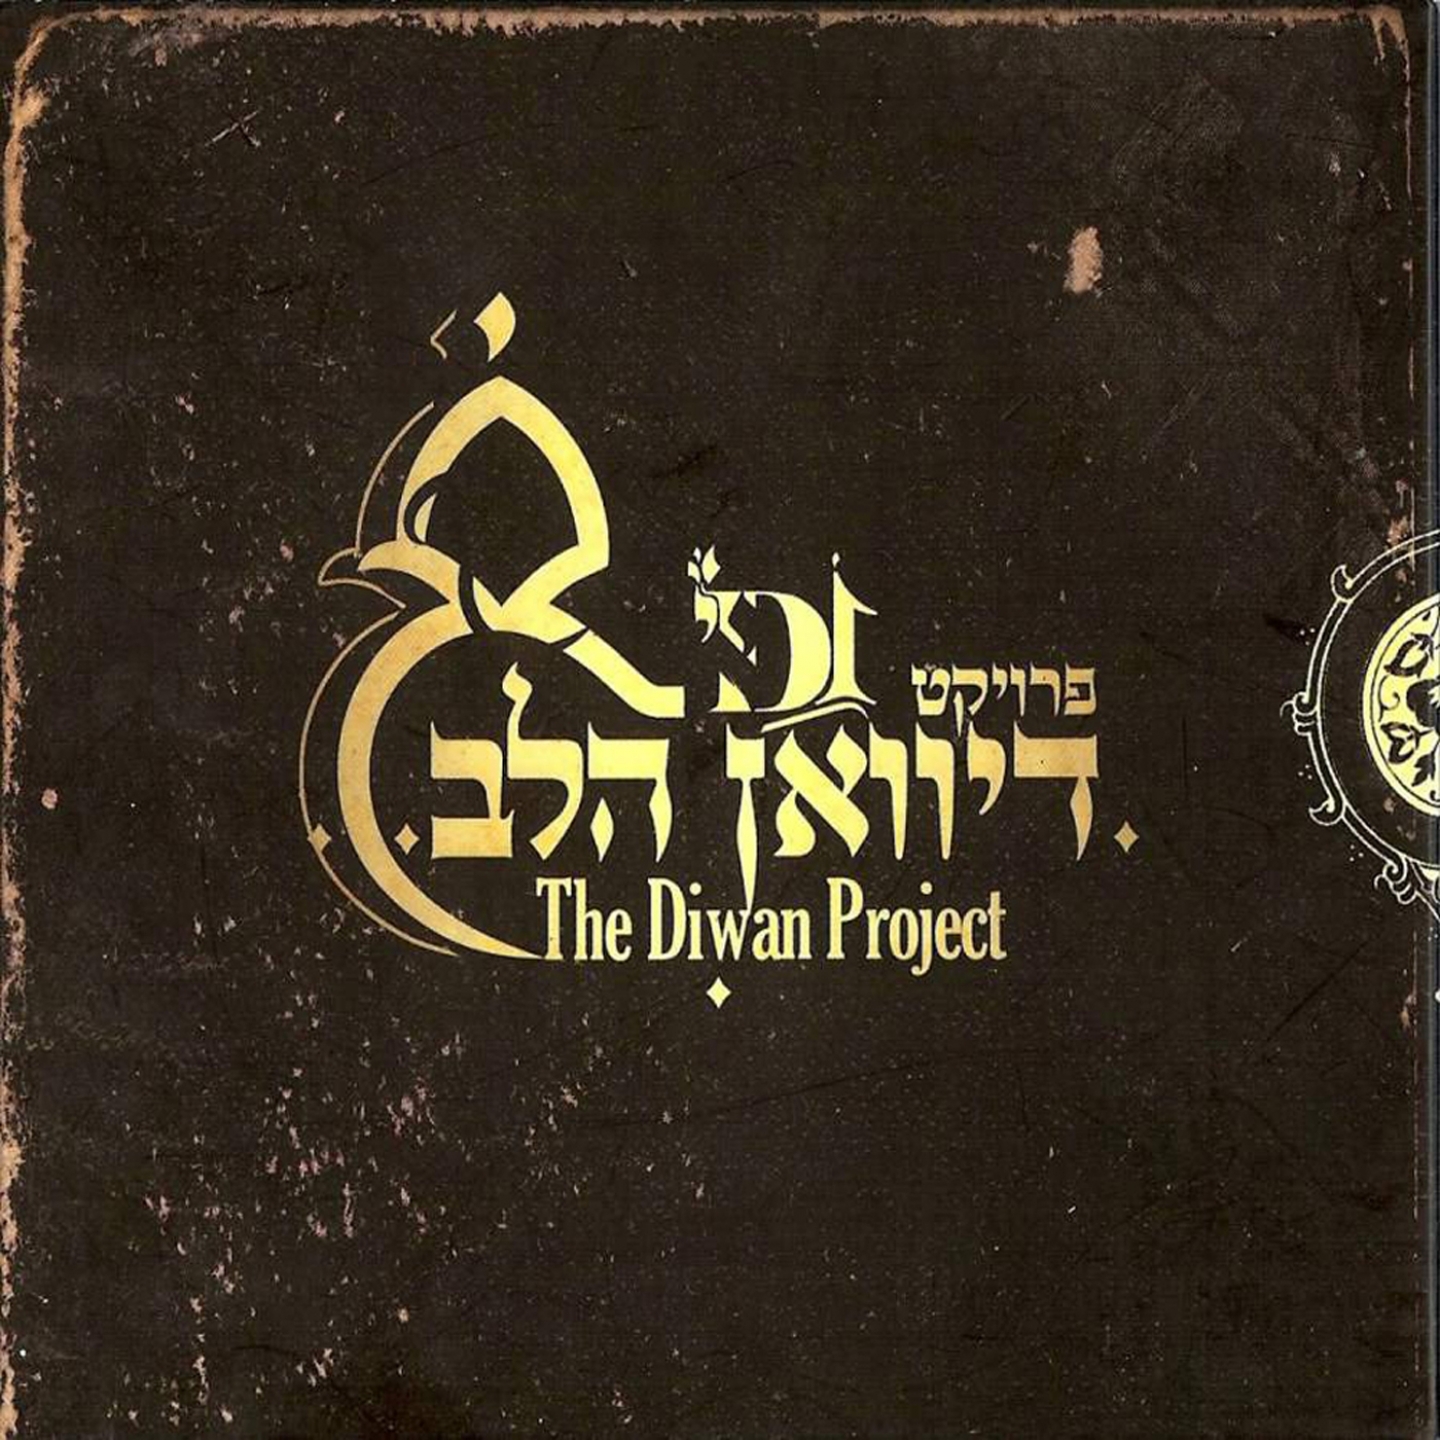 The Diwan Project